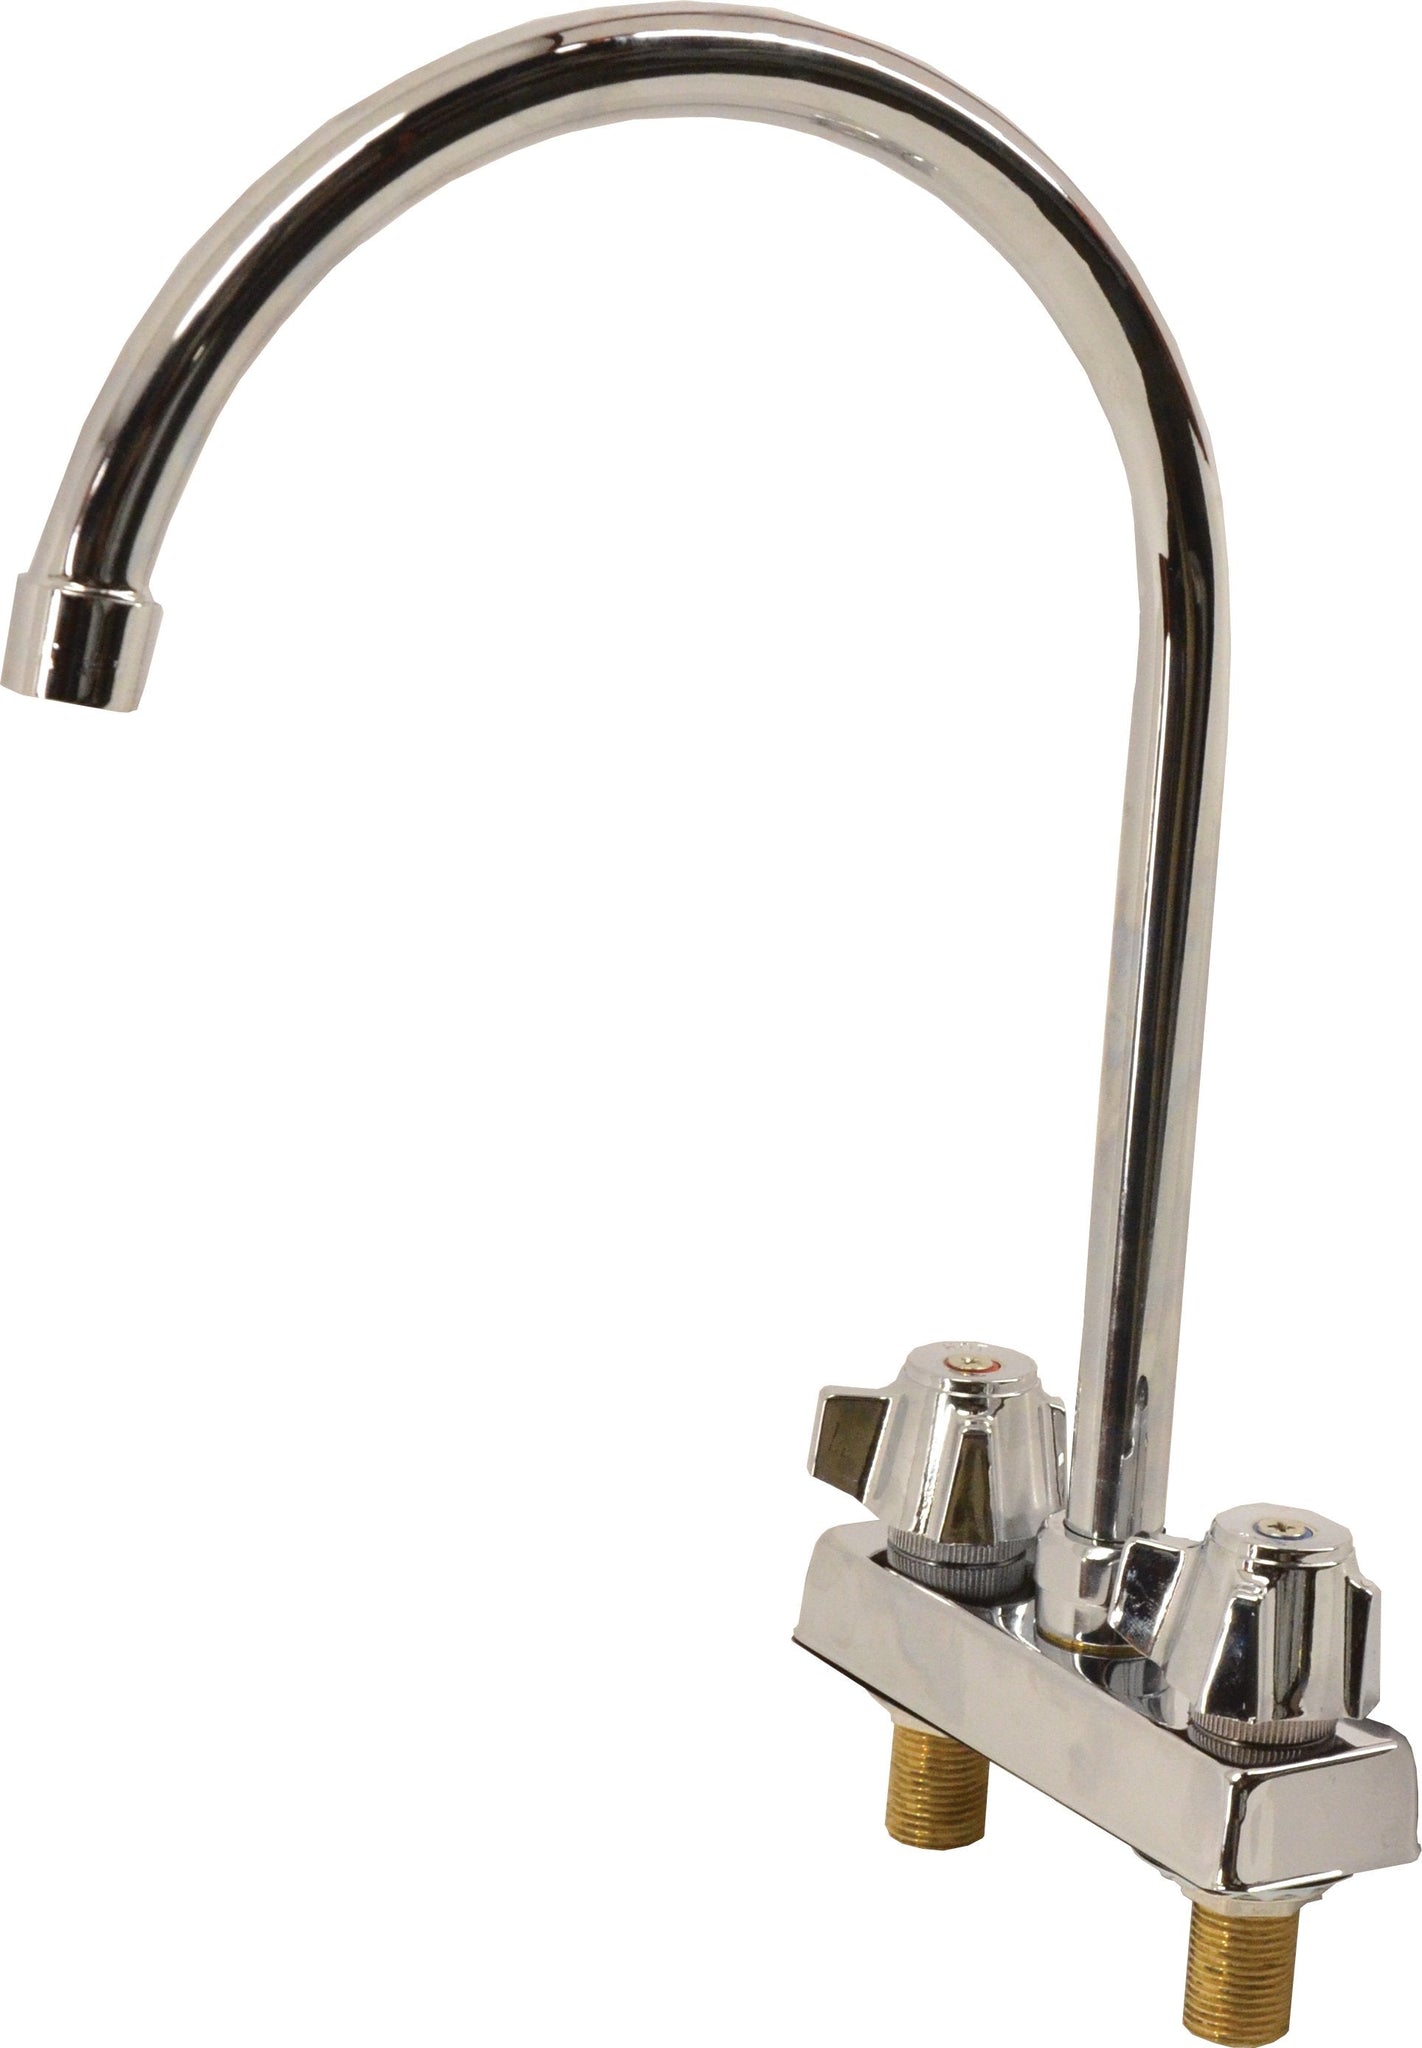 Omcan - Deck Mounted 4” Centers with 9” Goose Neck Spout Faucet, 2/cs - 39788